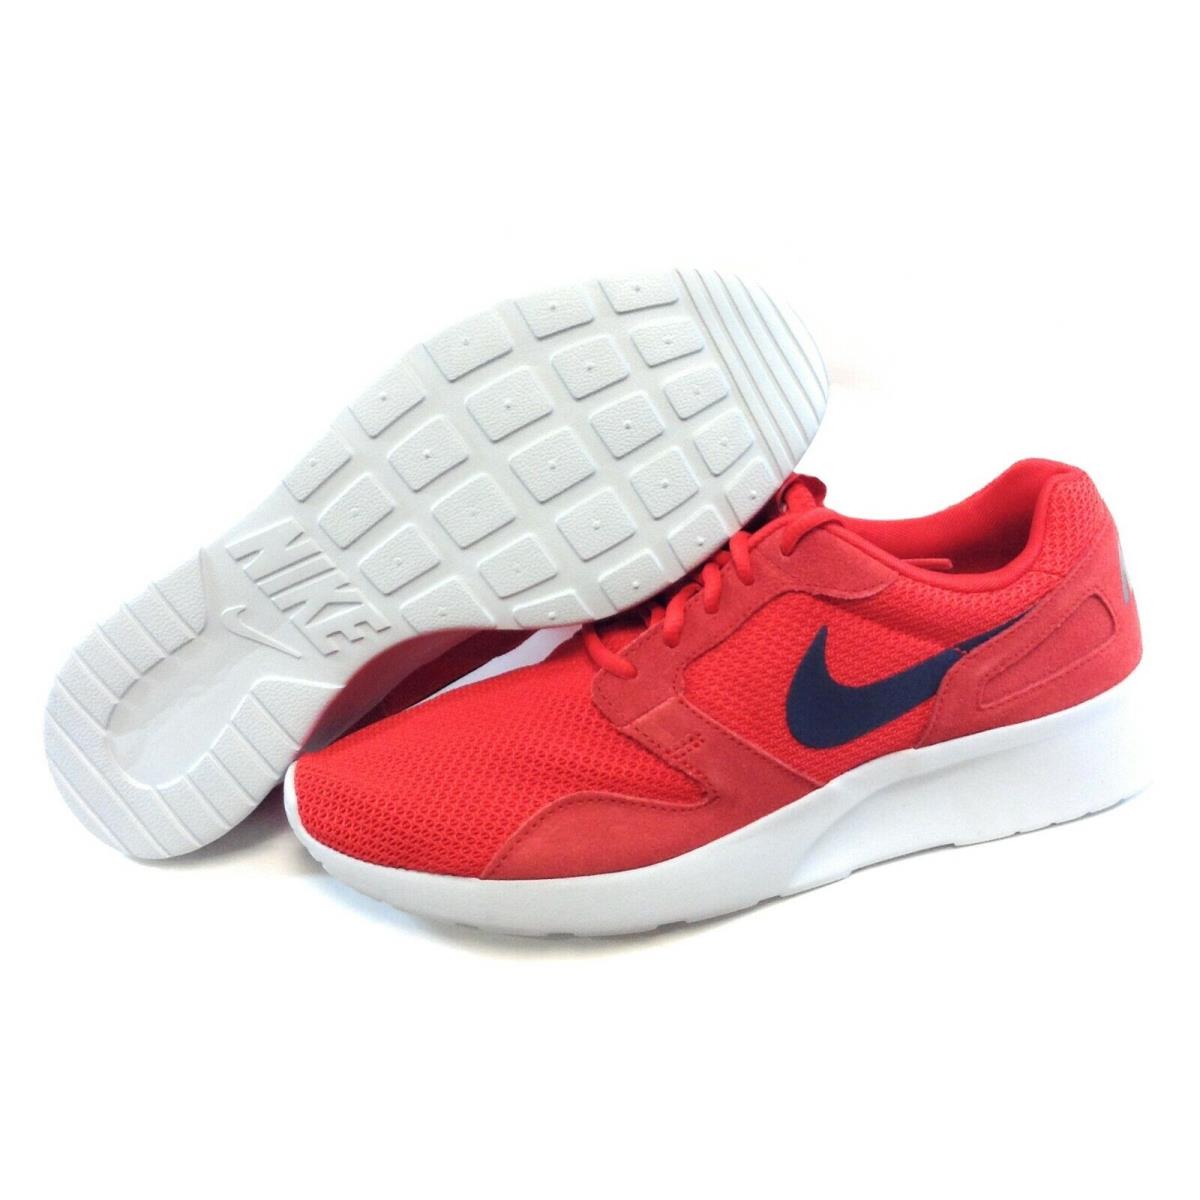 Mens Nike Kaishi 654473 600 Red Black Grey 2014 Deadstock Sneakers Shoes - Red , Chilling Red Manufacturer